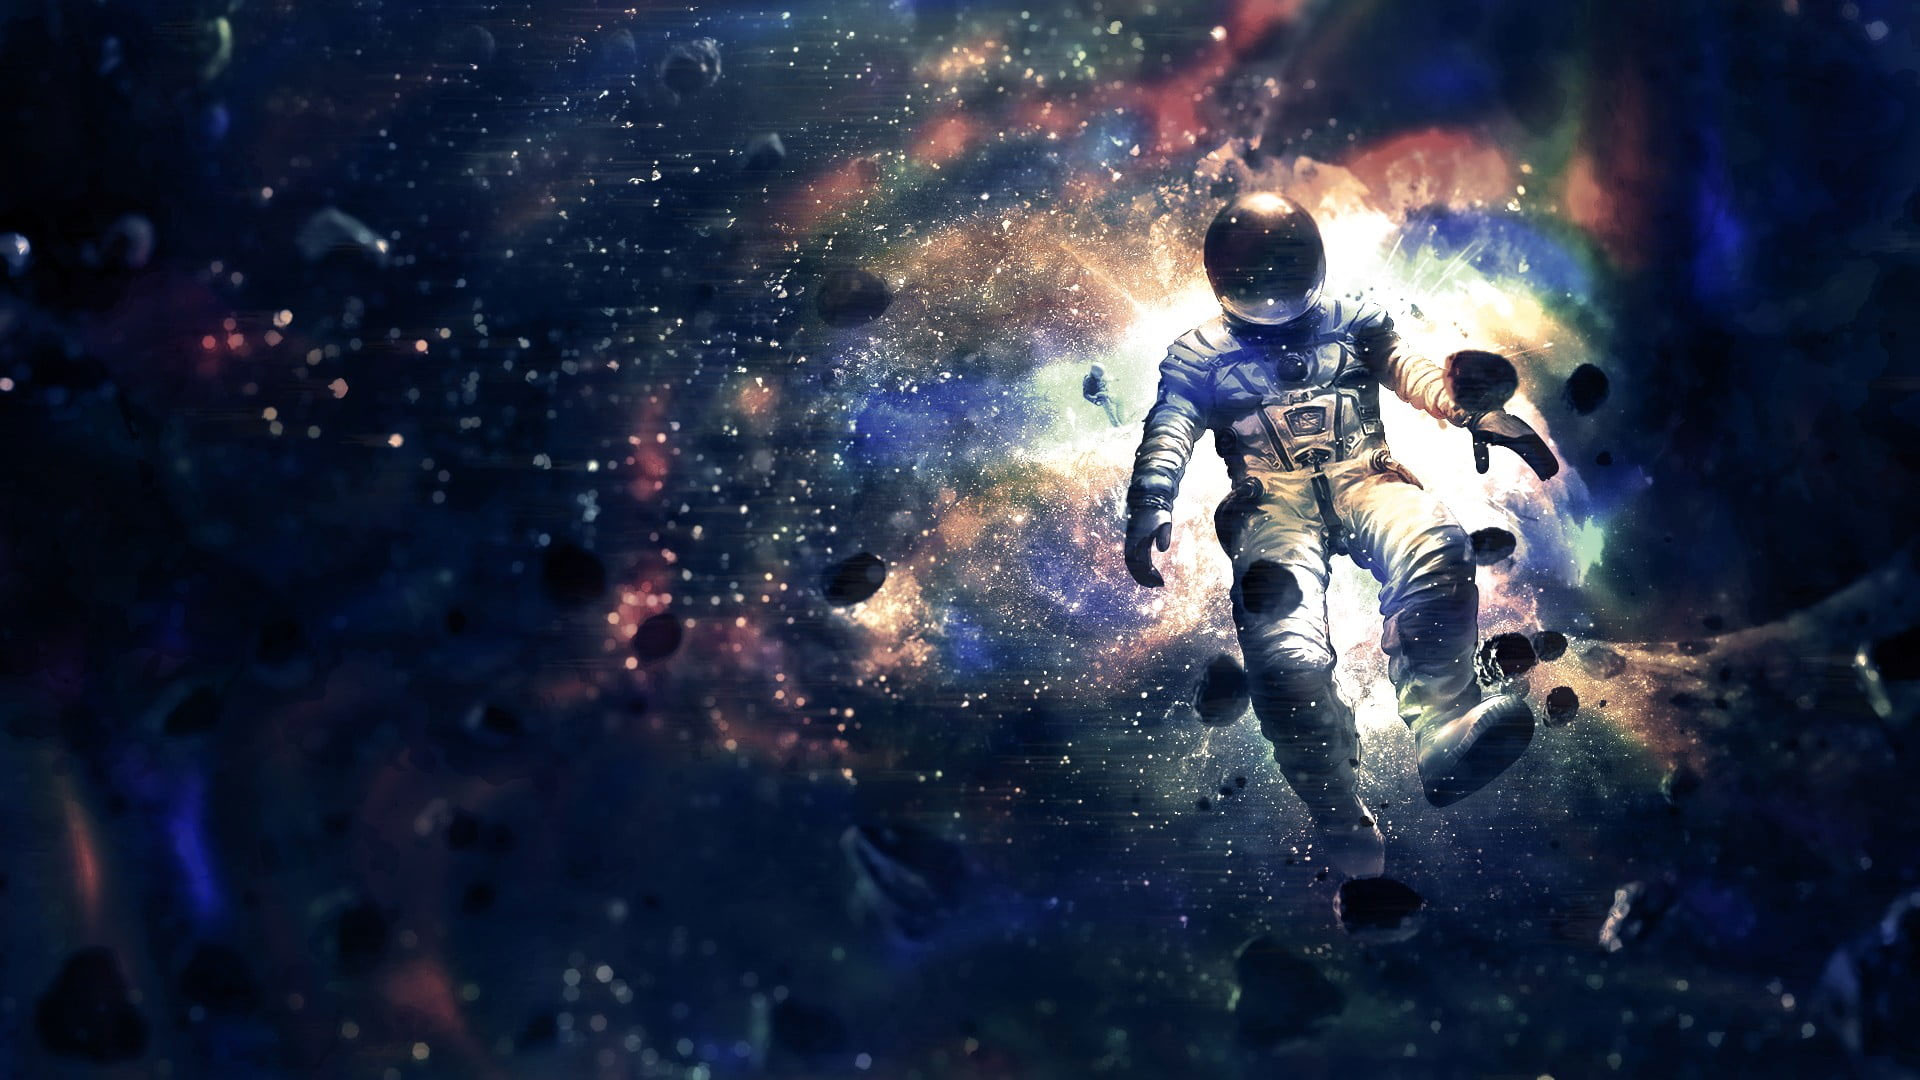 Astronaut on space wallpaper, LSD, drugs, front view, nature